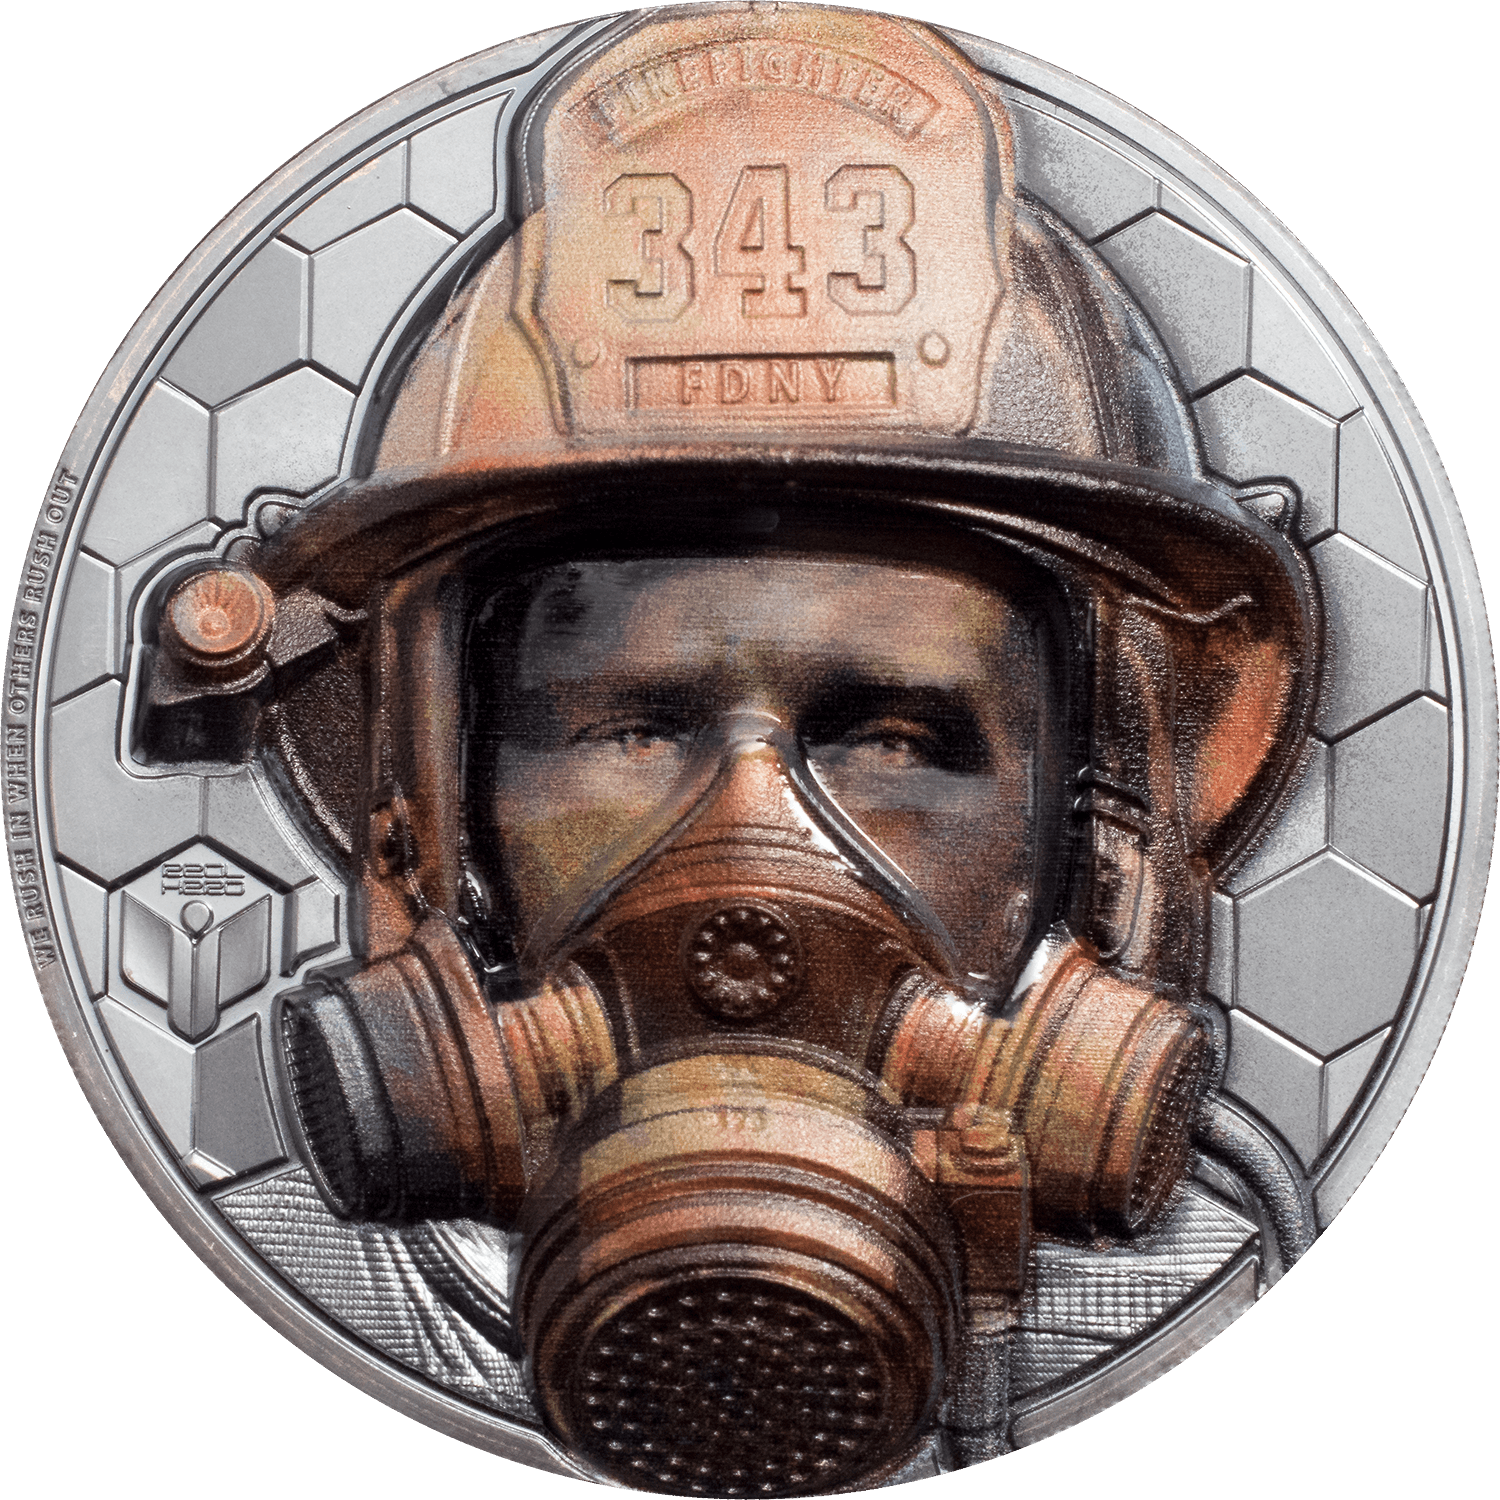 FIREFIGHTER Real Heroes 3 Oz Silver Coin $20 Cook Islands 2021 - PARTHAVA COIN